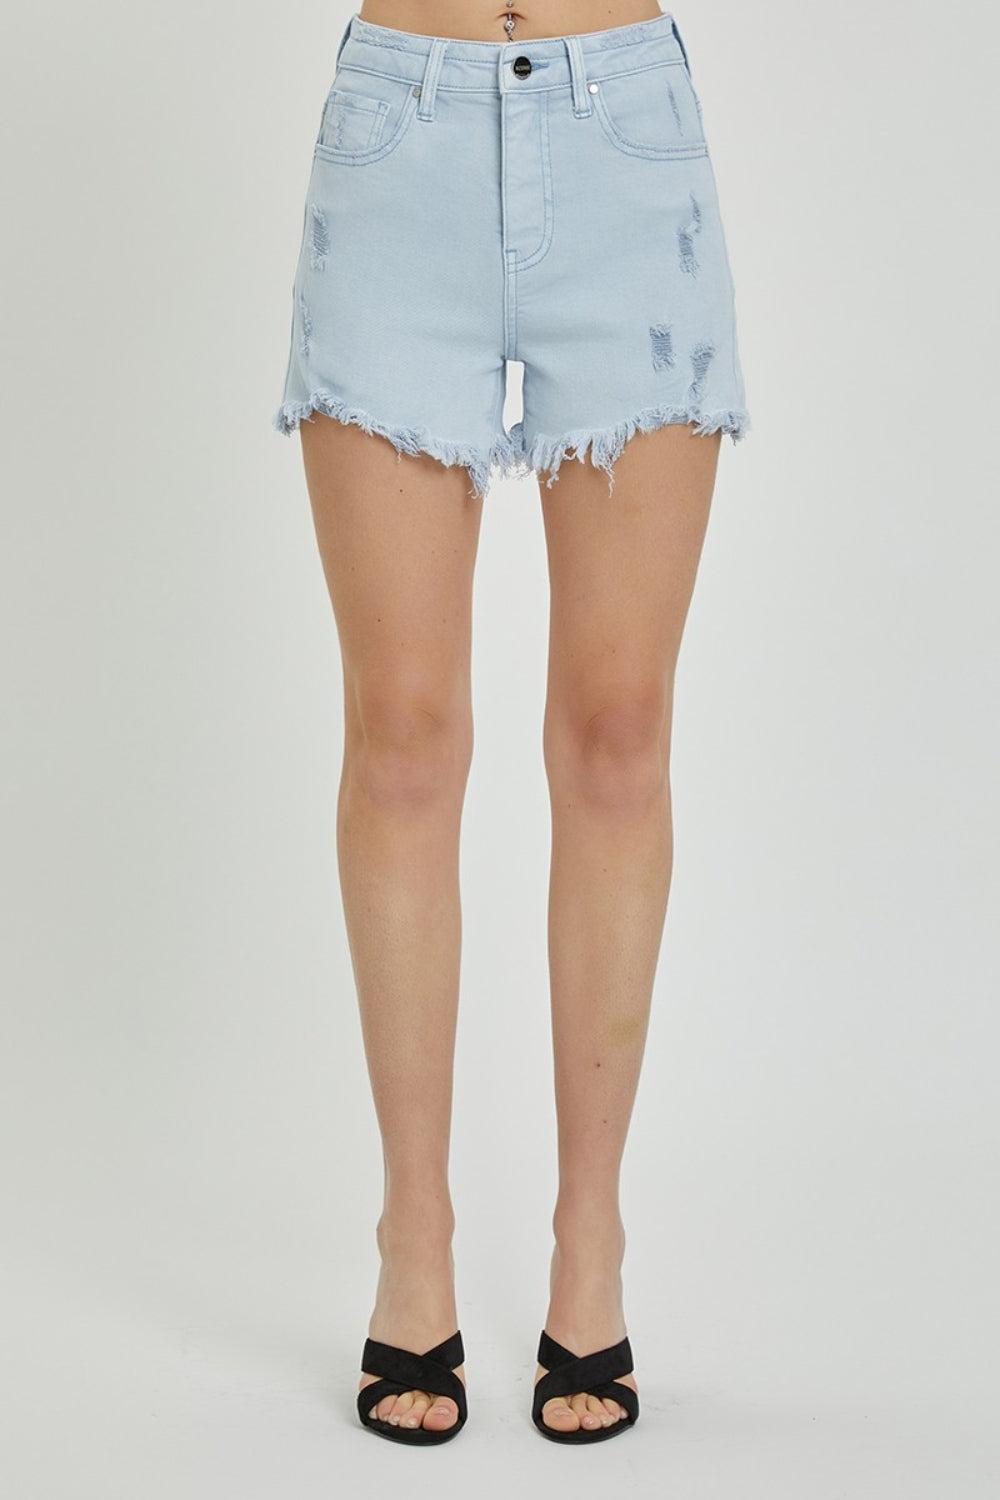 Full Size High Rise Distressed Detail Denim Shorts for Women | Shorts | Ro + Ivy